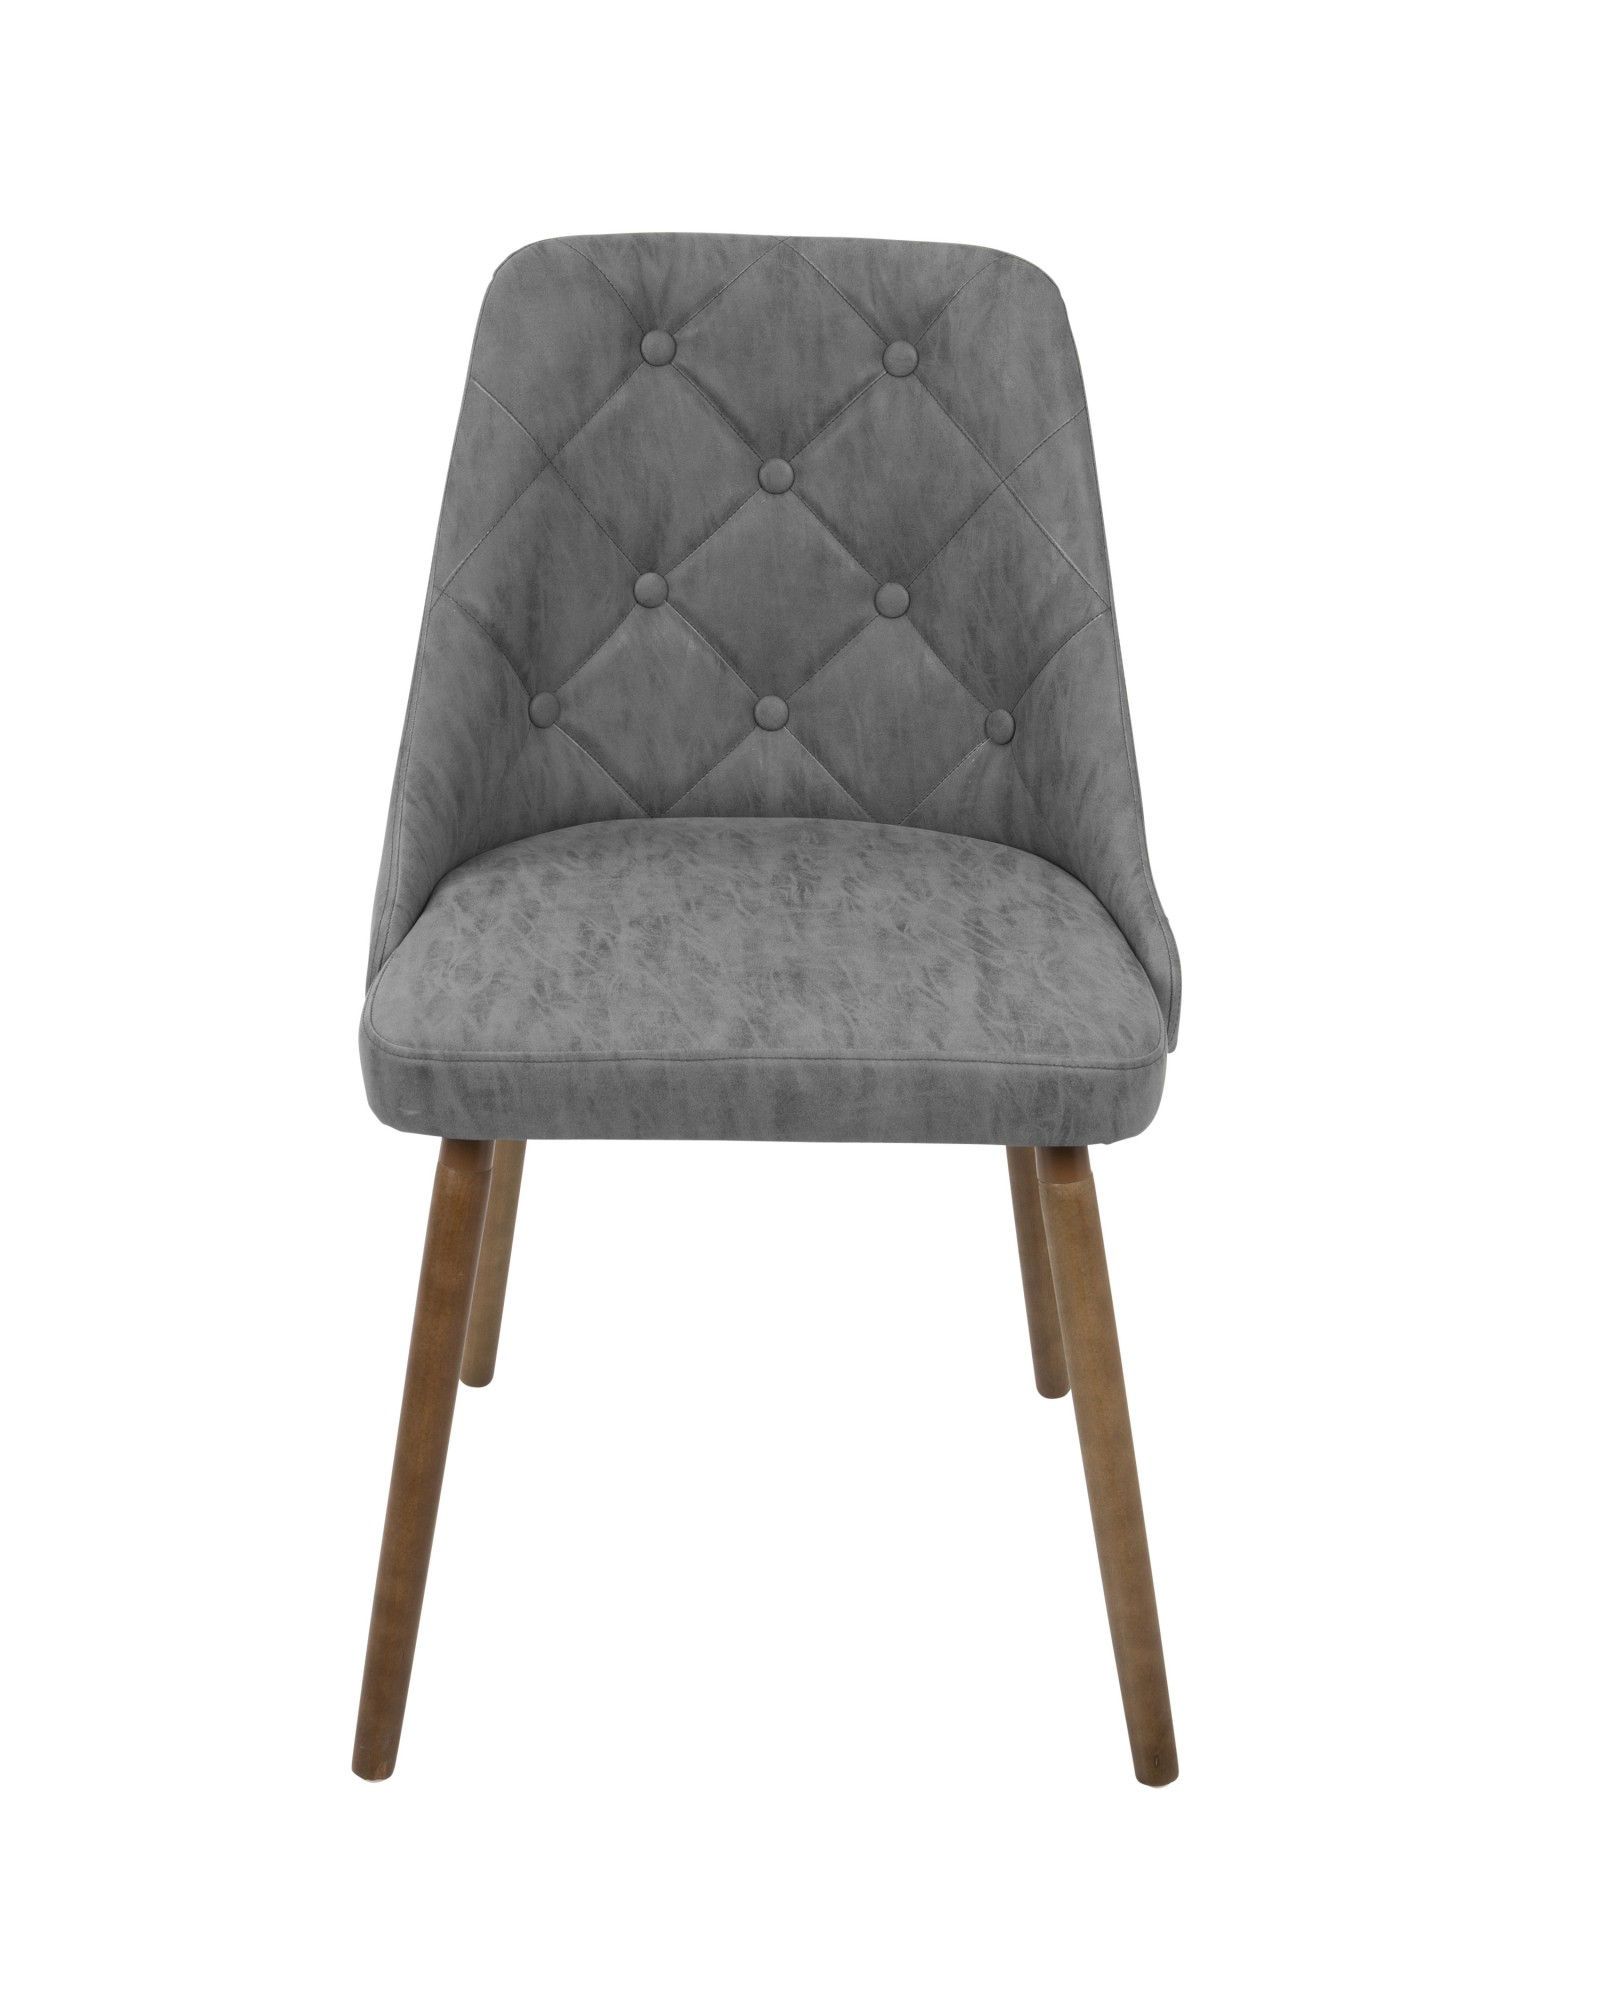 Giovanni Mid-Century Modern Dining/Accent Chair in Walnut and Grey Quilted Faux Leather